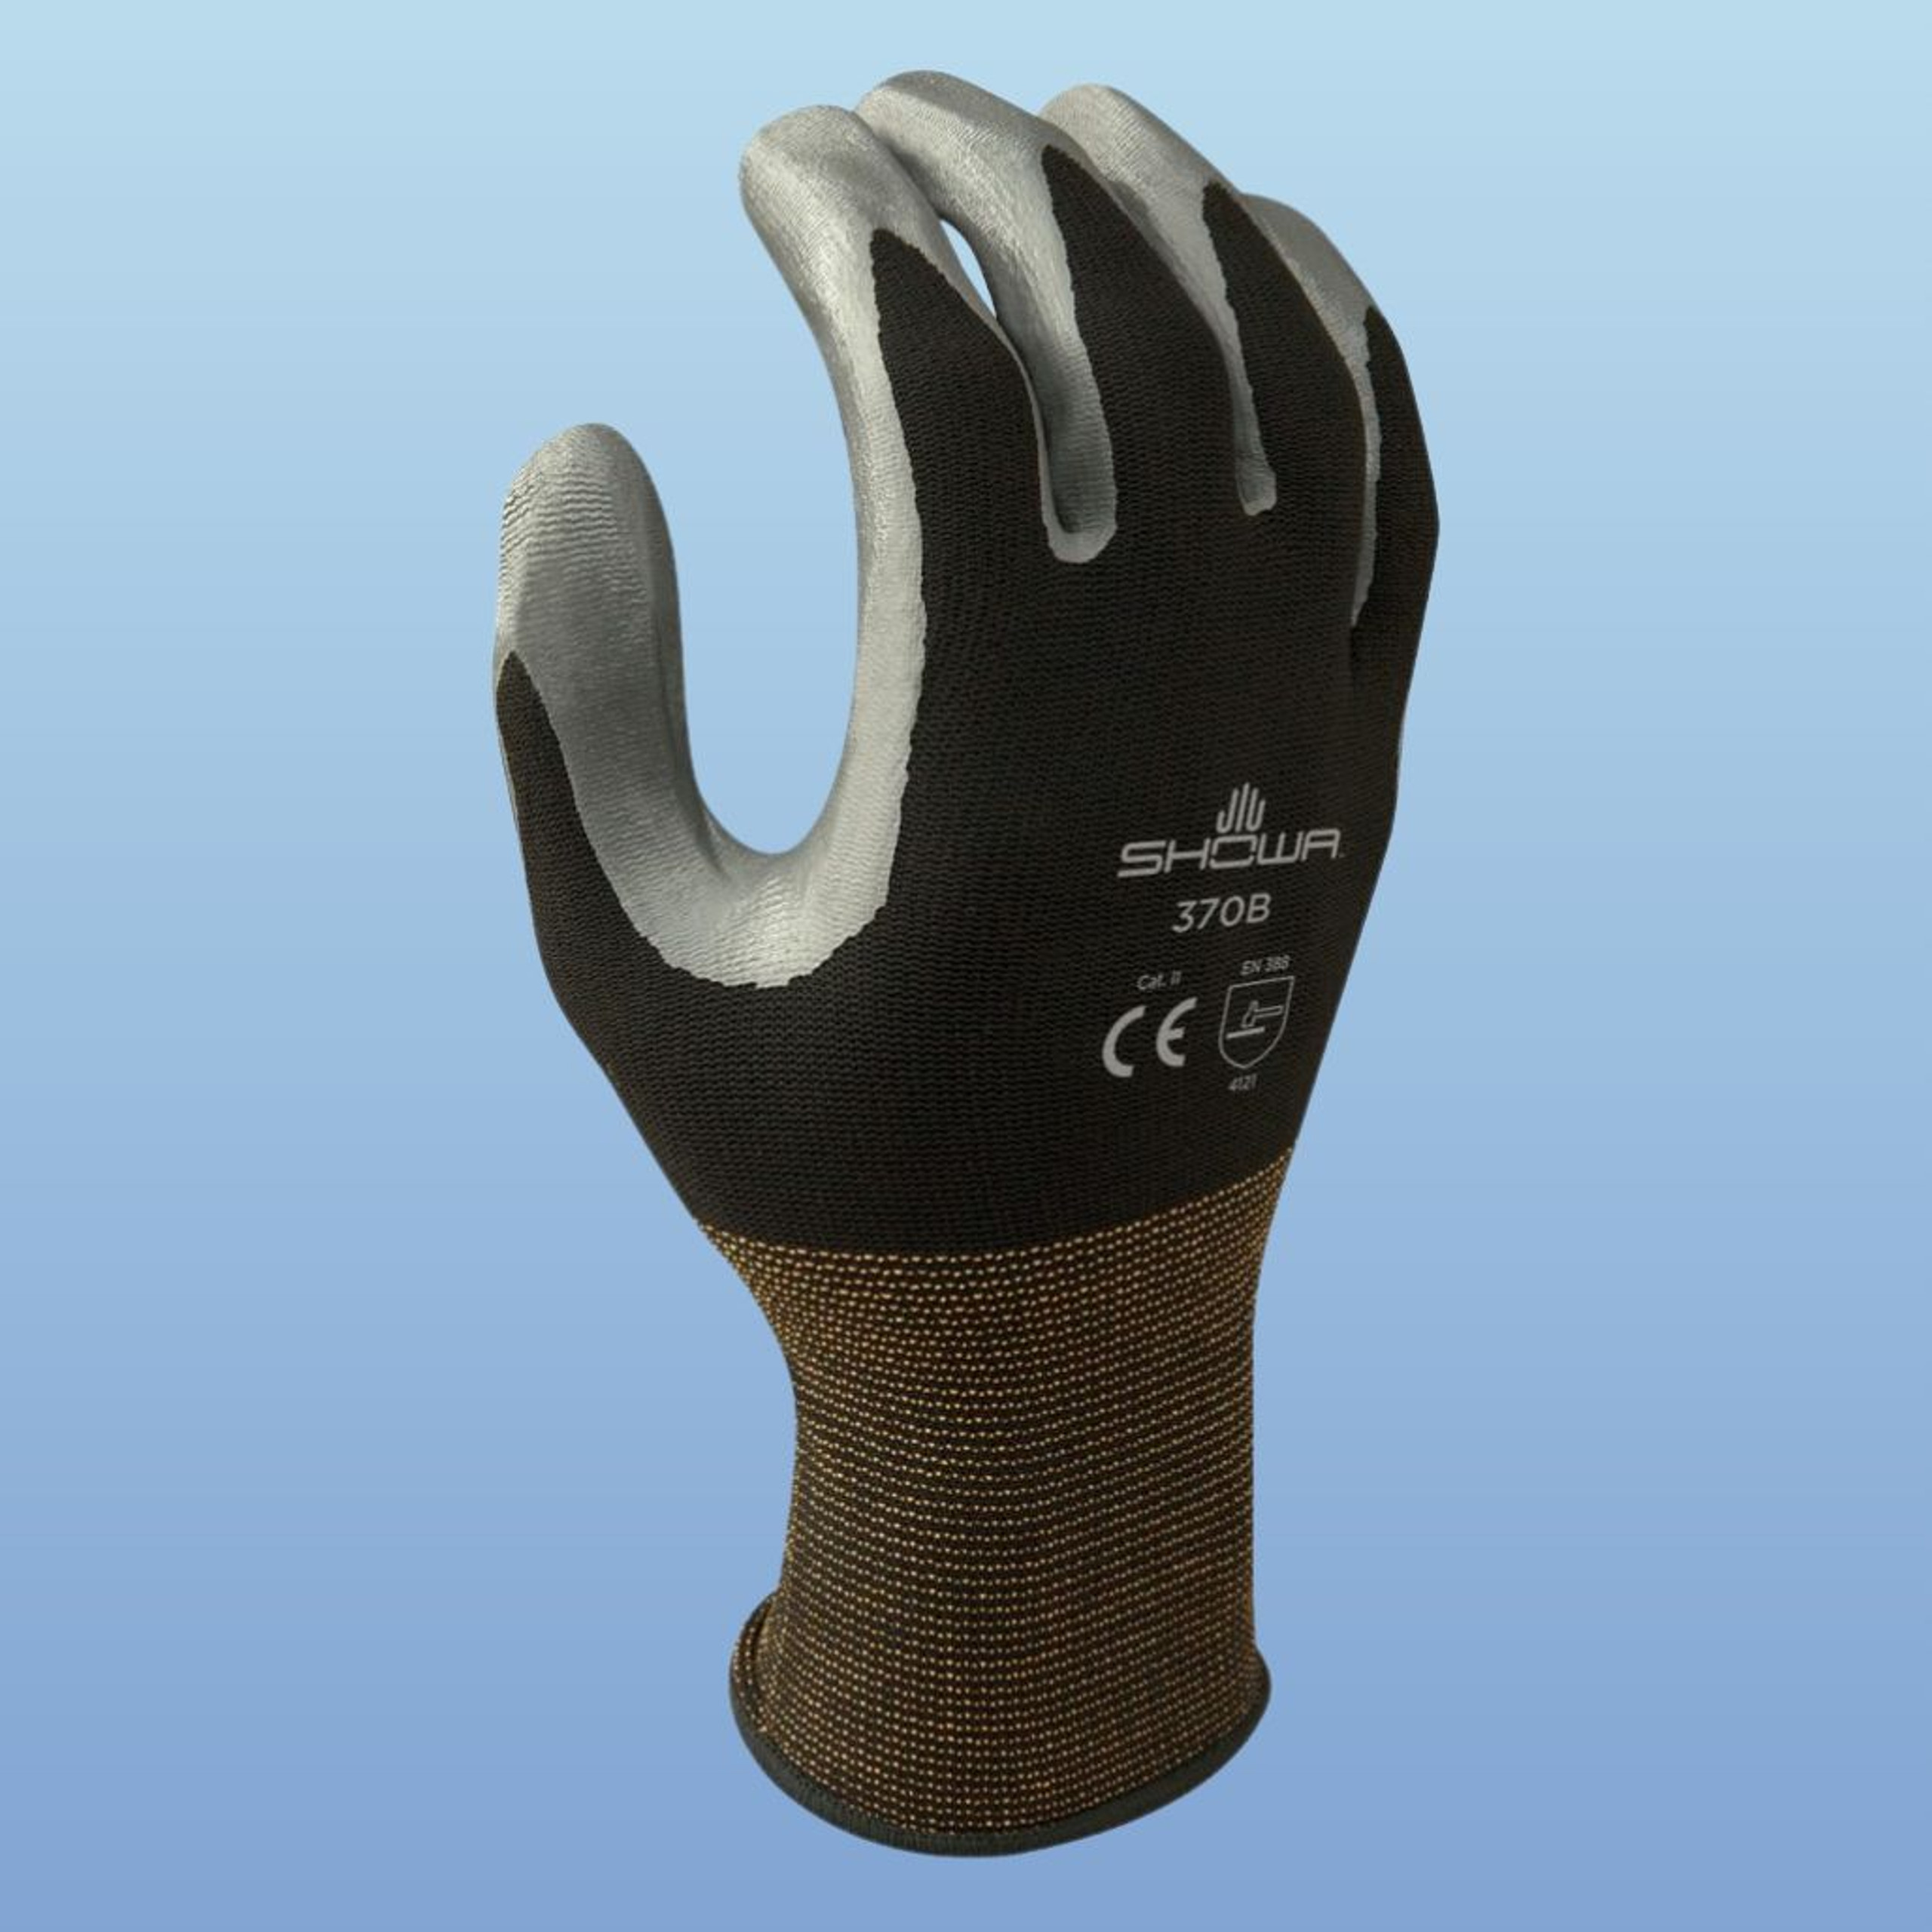 Showa Atlas 370 Assembly Grip Nitrile Coated Glove